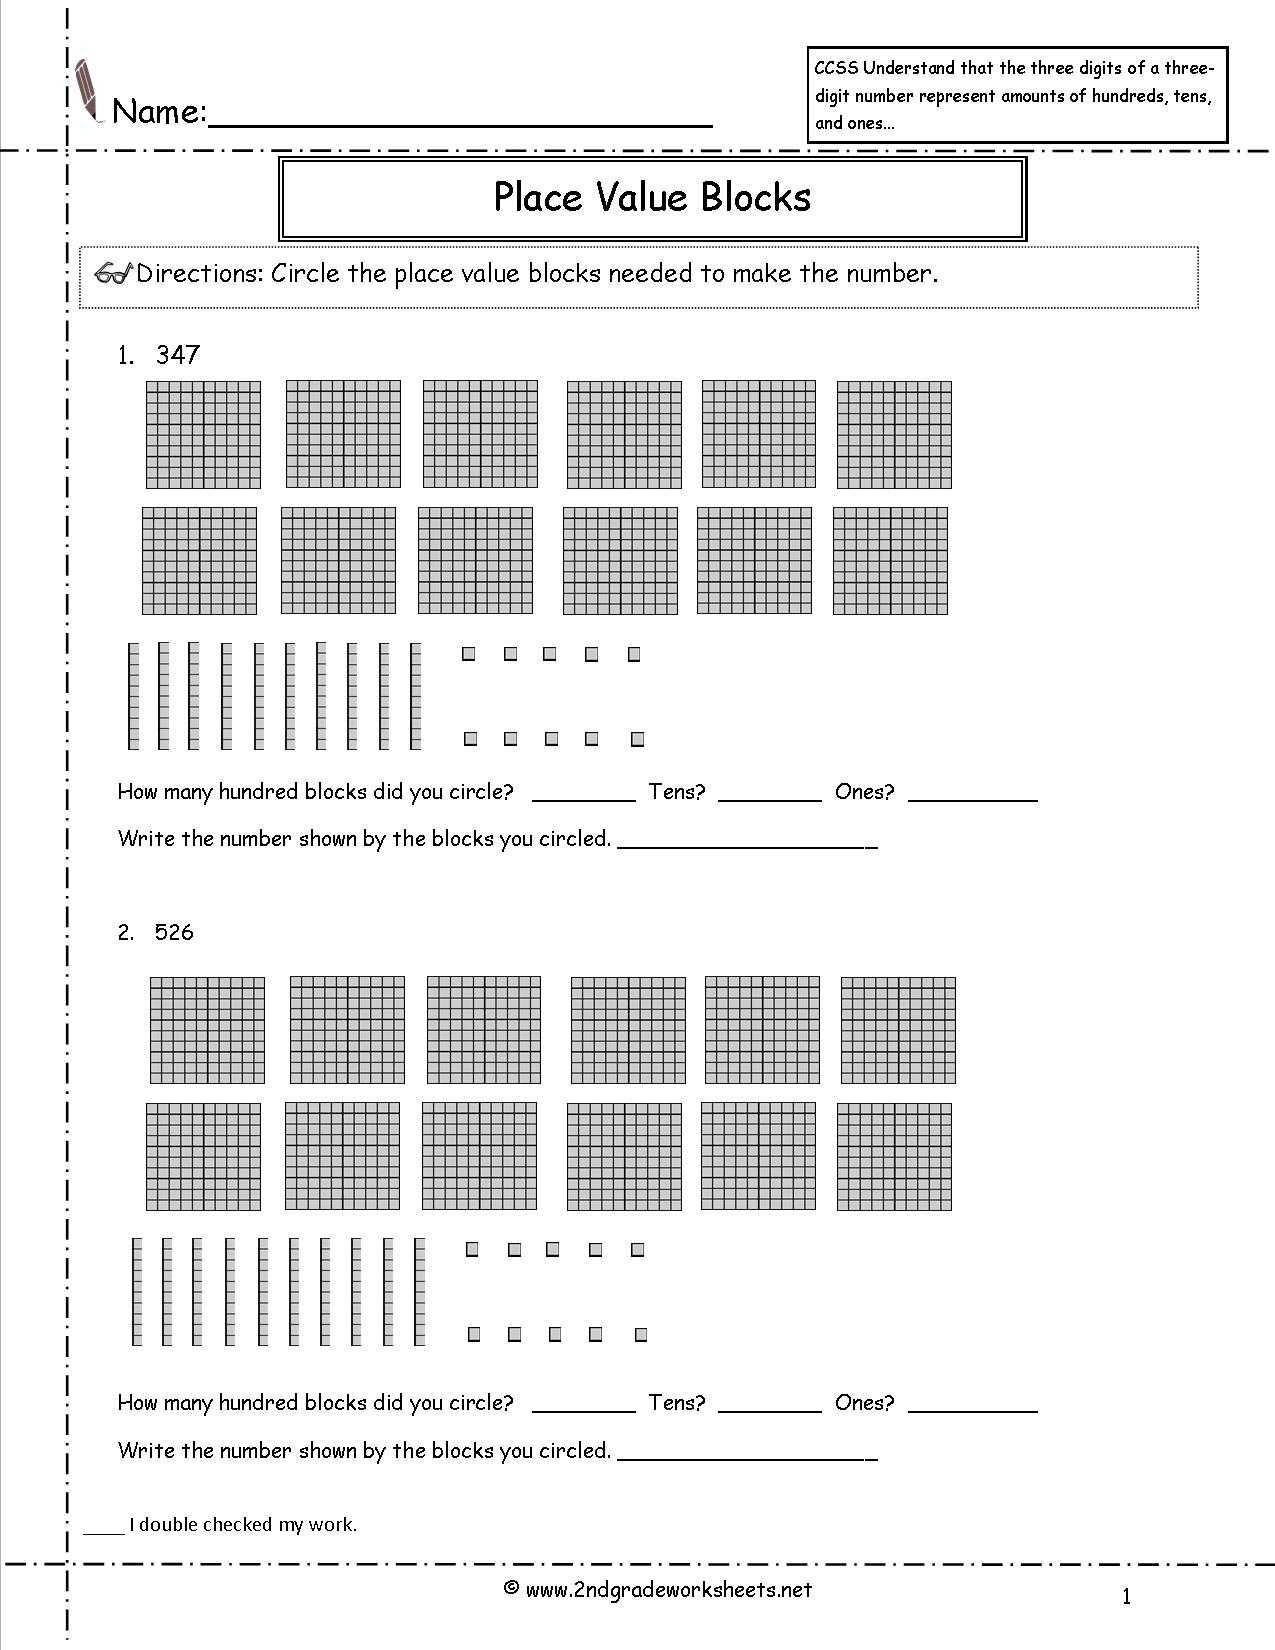 4th Grade Main Idea Worksheets Multiple Choice as Well as Place Value Worksheets Multiple the Best Worksheets Image Collection